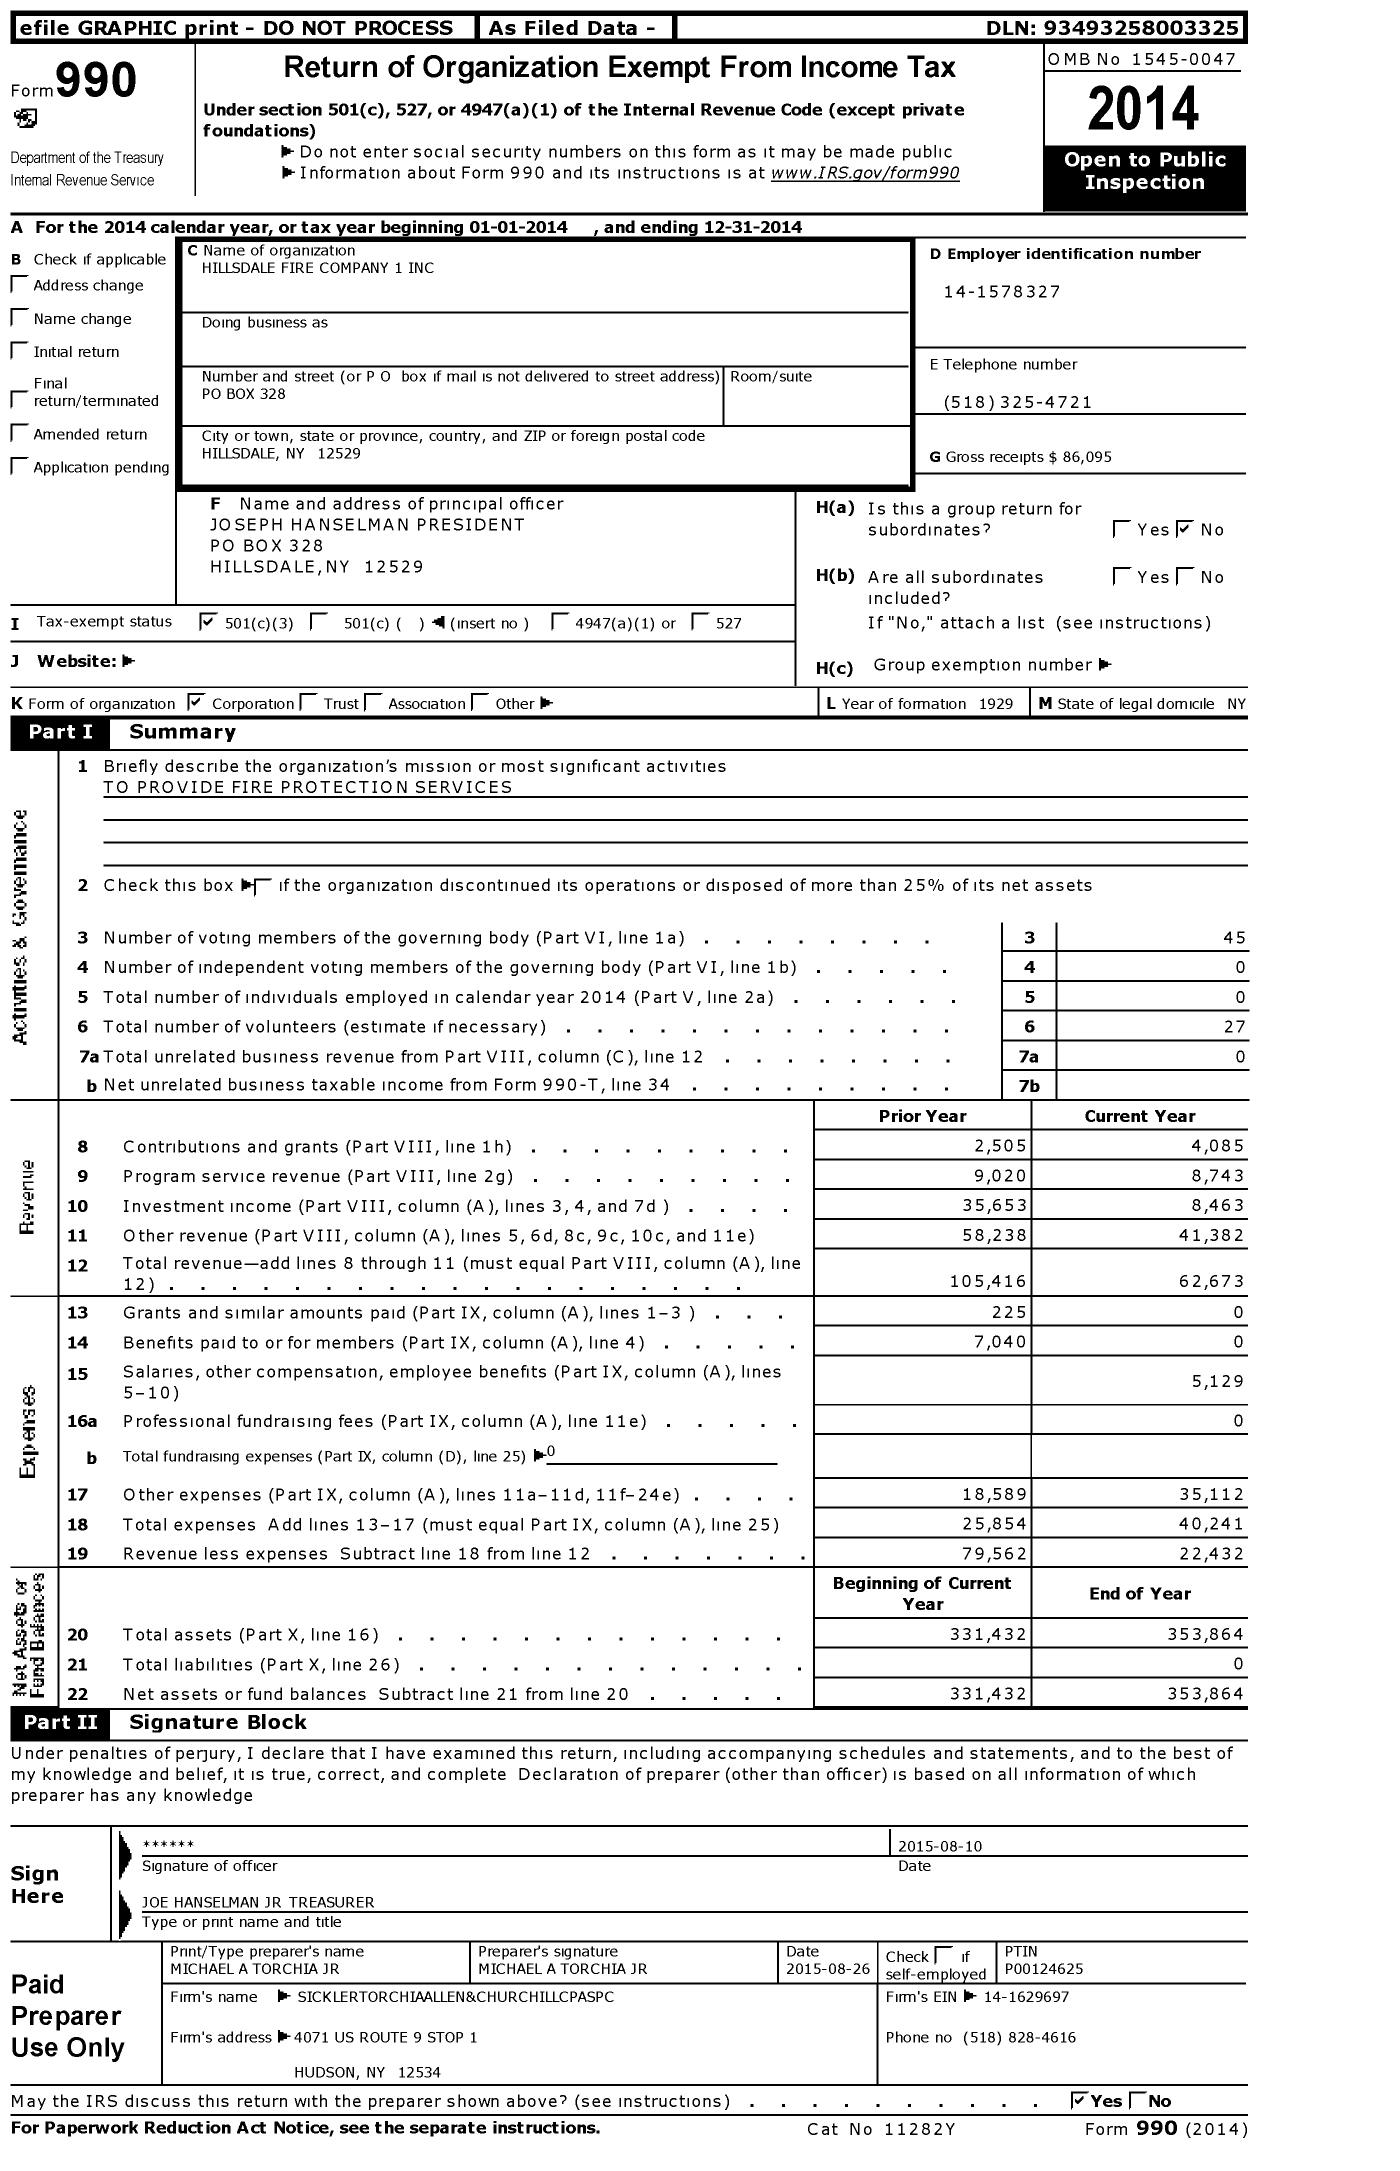 Image of first page of 2014 Form 990 for Hillsdale Fire Company #1